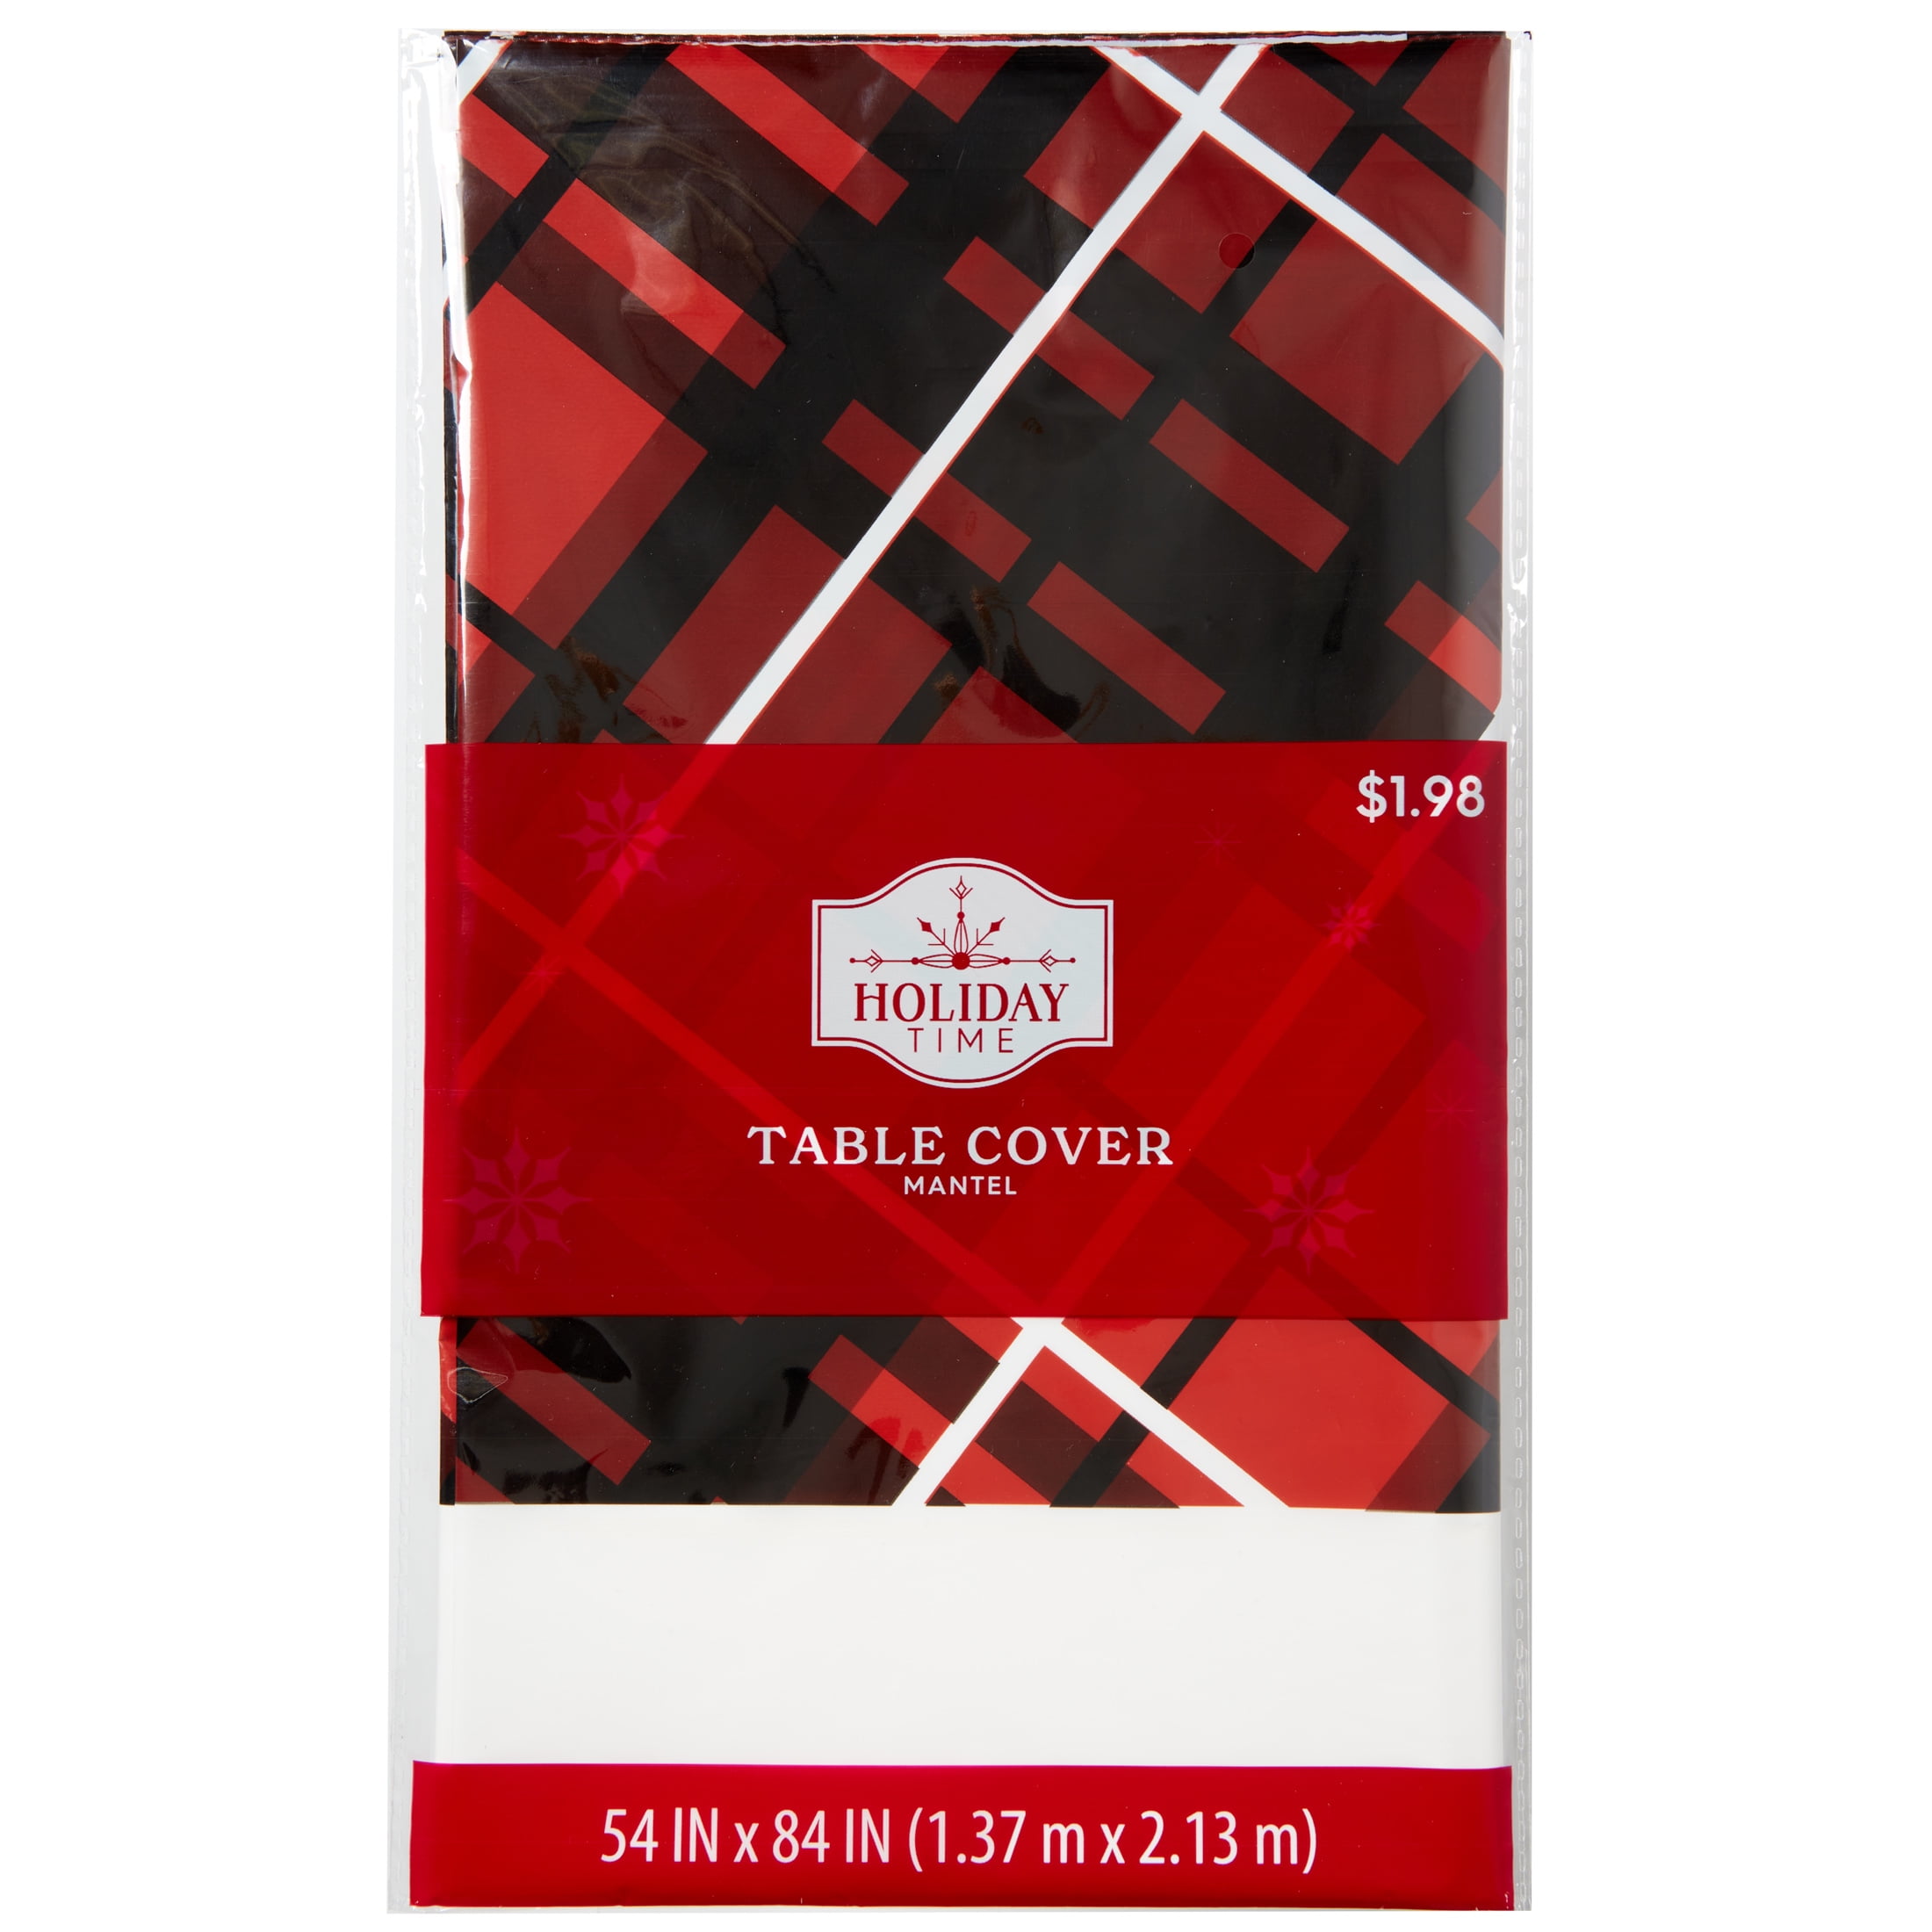 Holiday Time Plaid Table Cover, Red, White, Black, 54" x 84", Disposable Plastic, Christmas Partyware, 1 Count